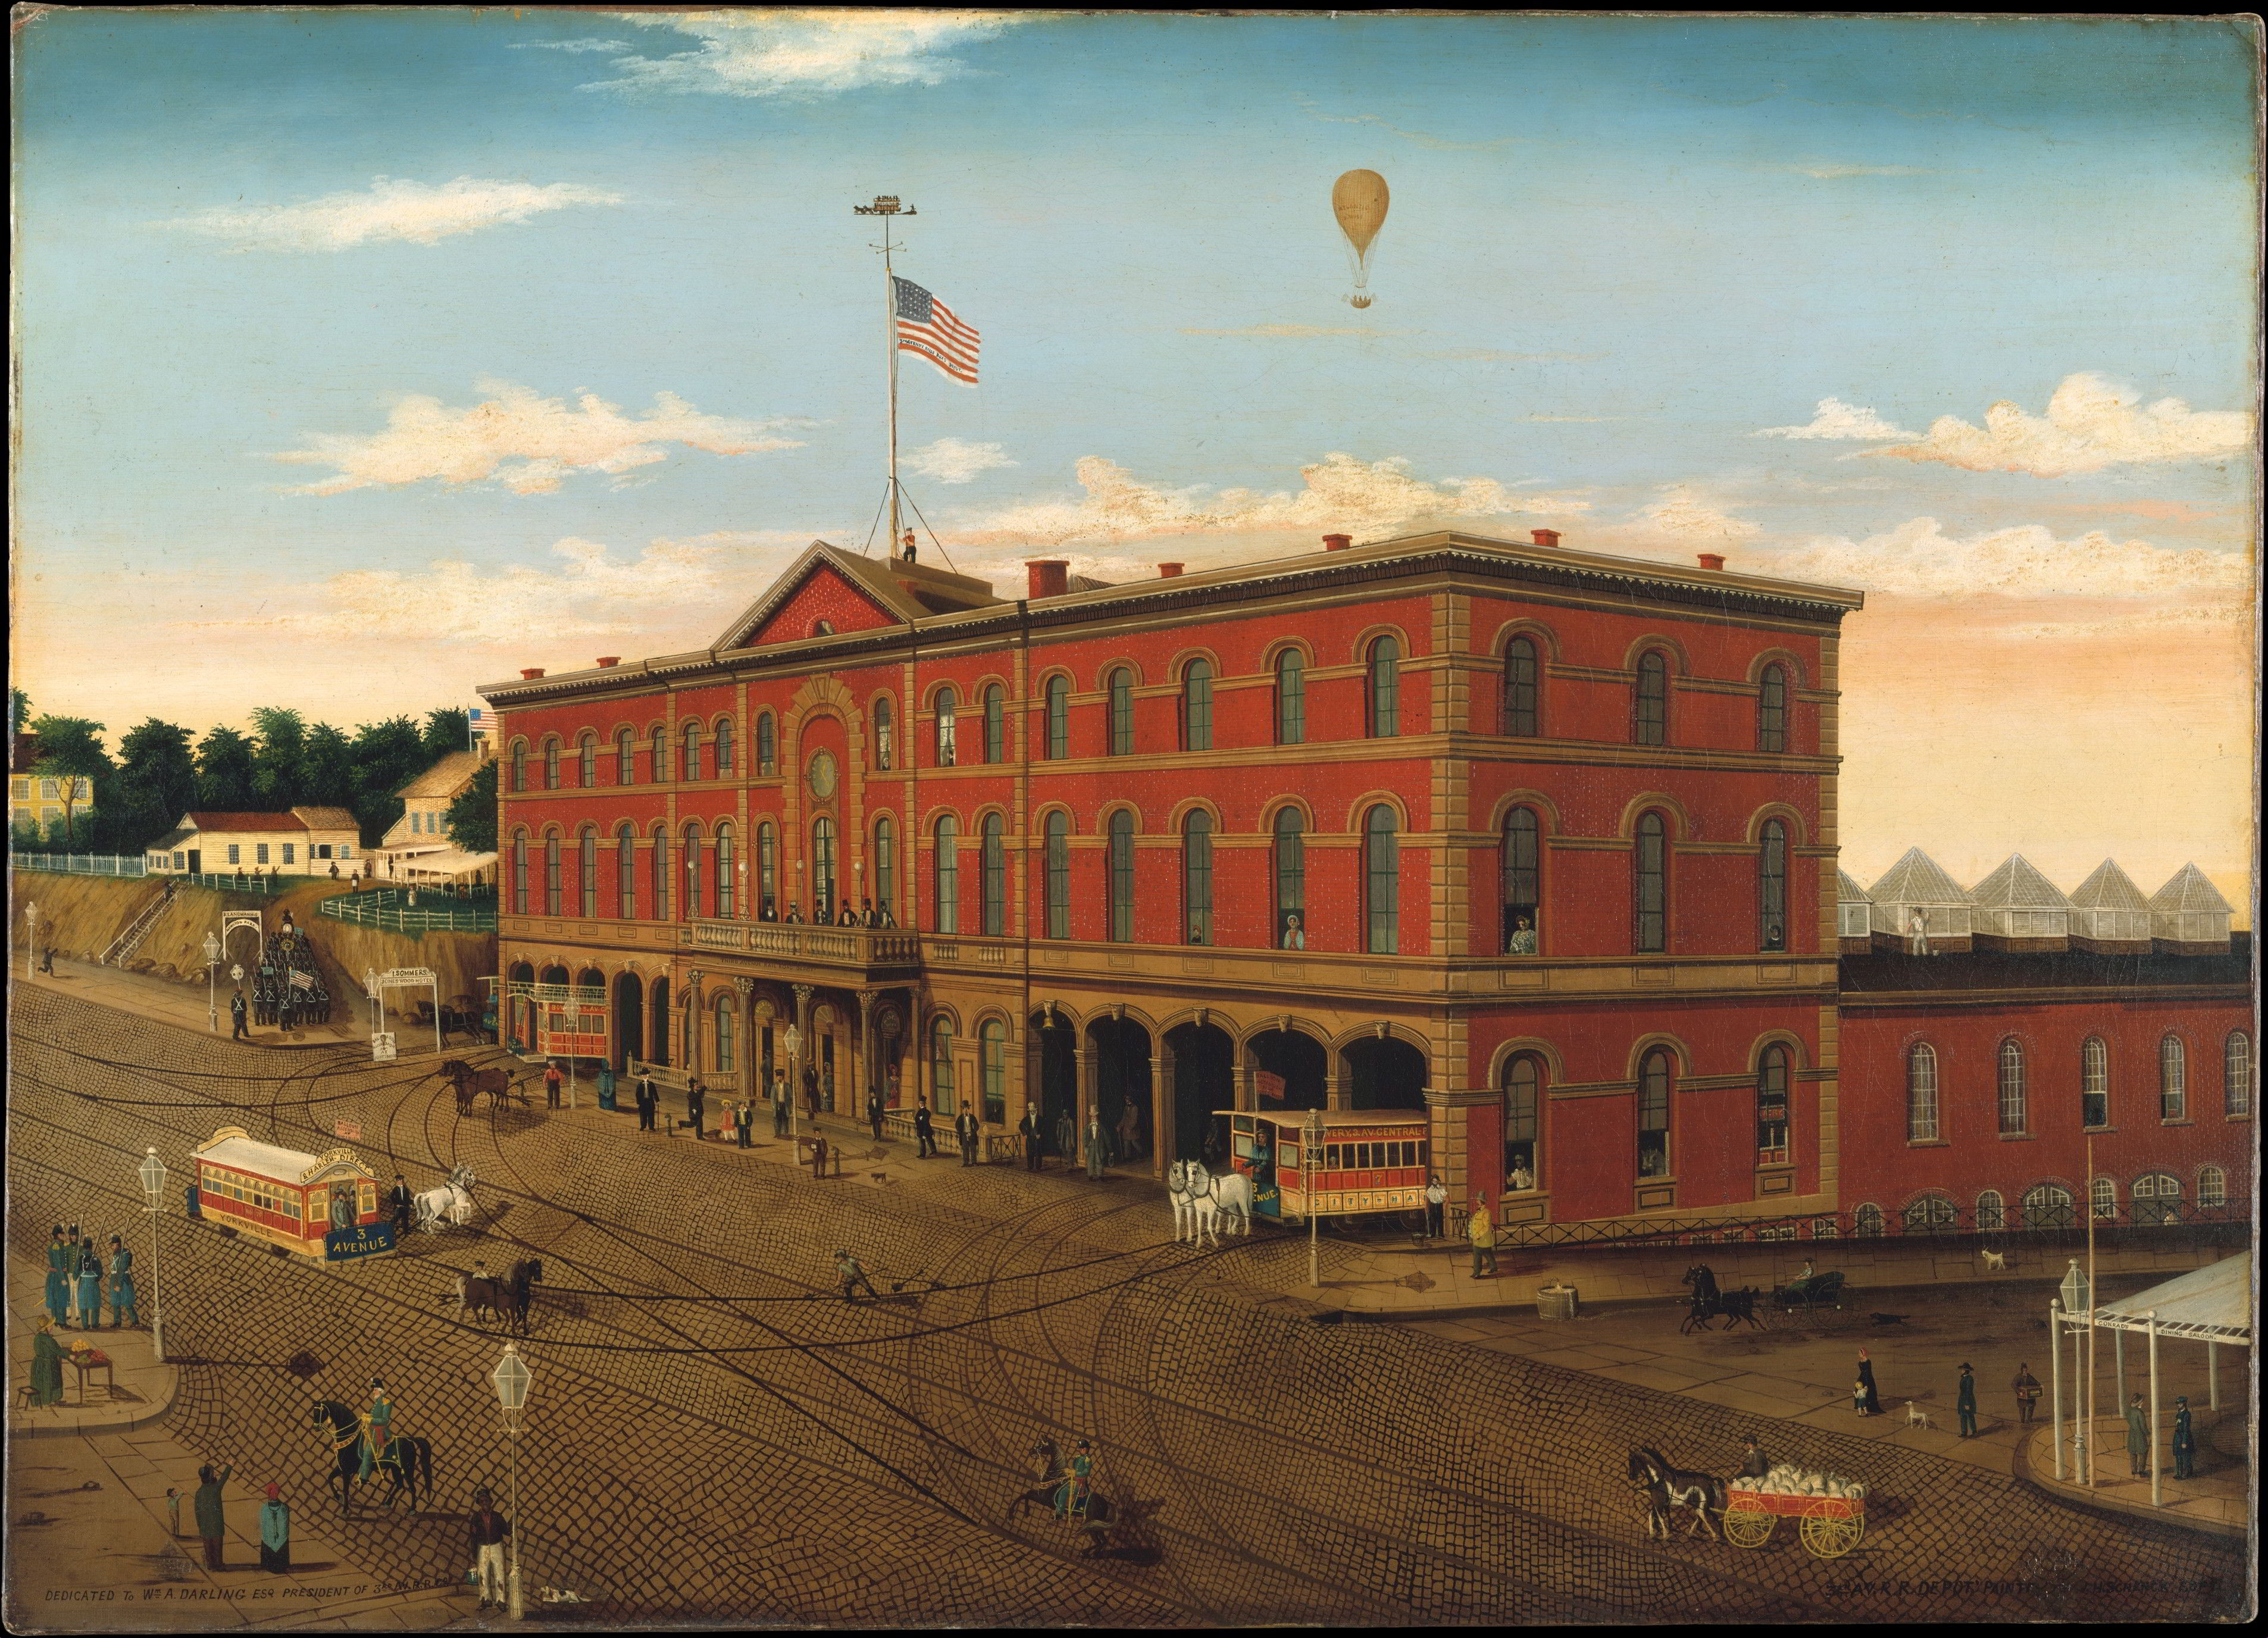 The Third Avenue Railroad Depot by William H. Schenck-American Painting